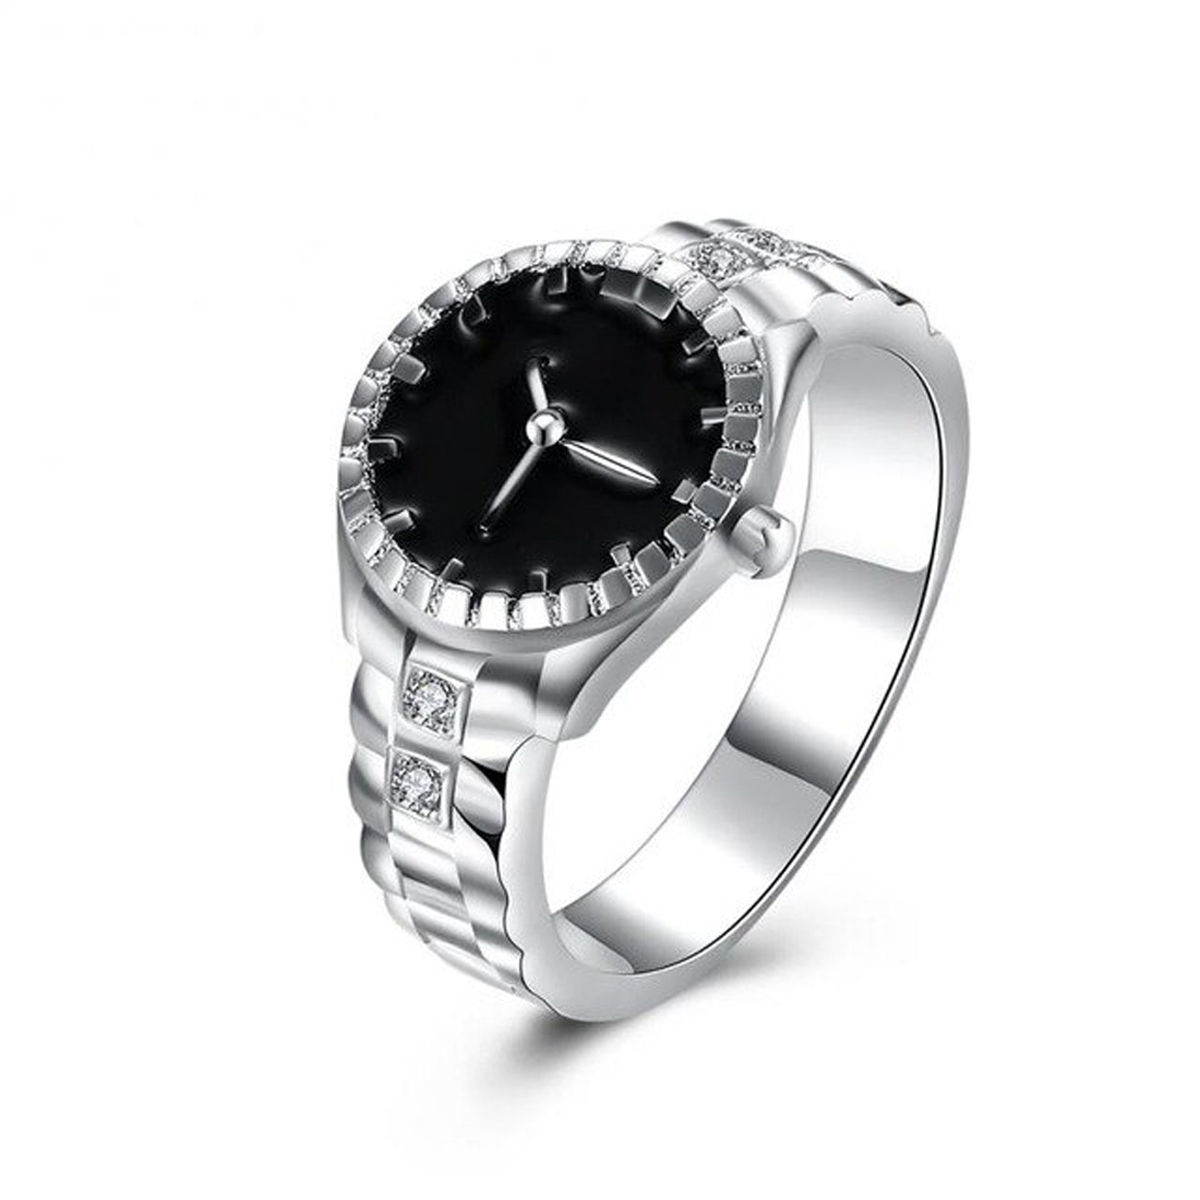 Clever Digital Watch That Is Worn as a Ring